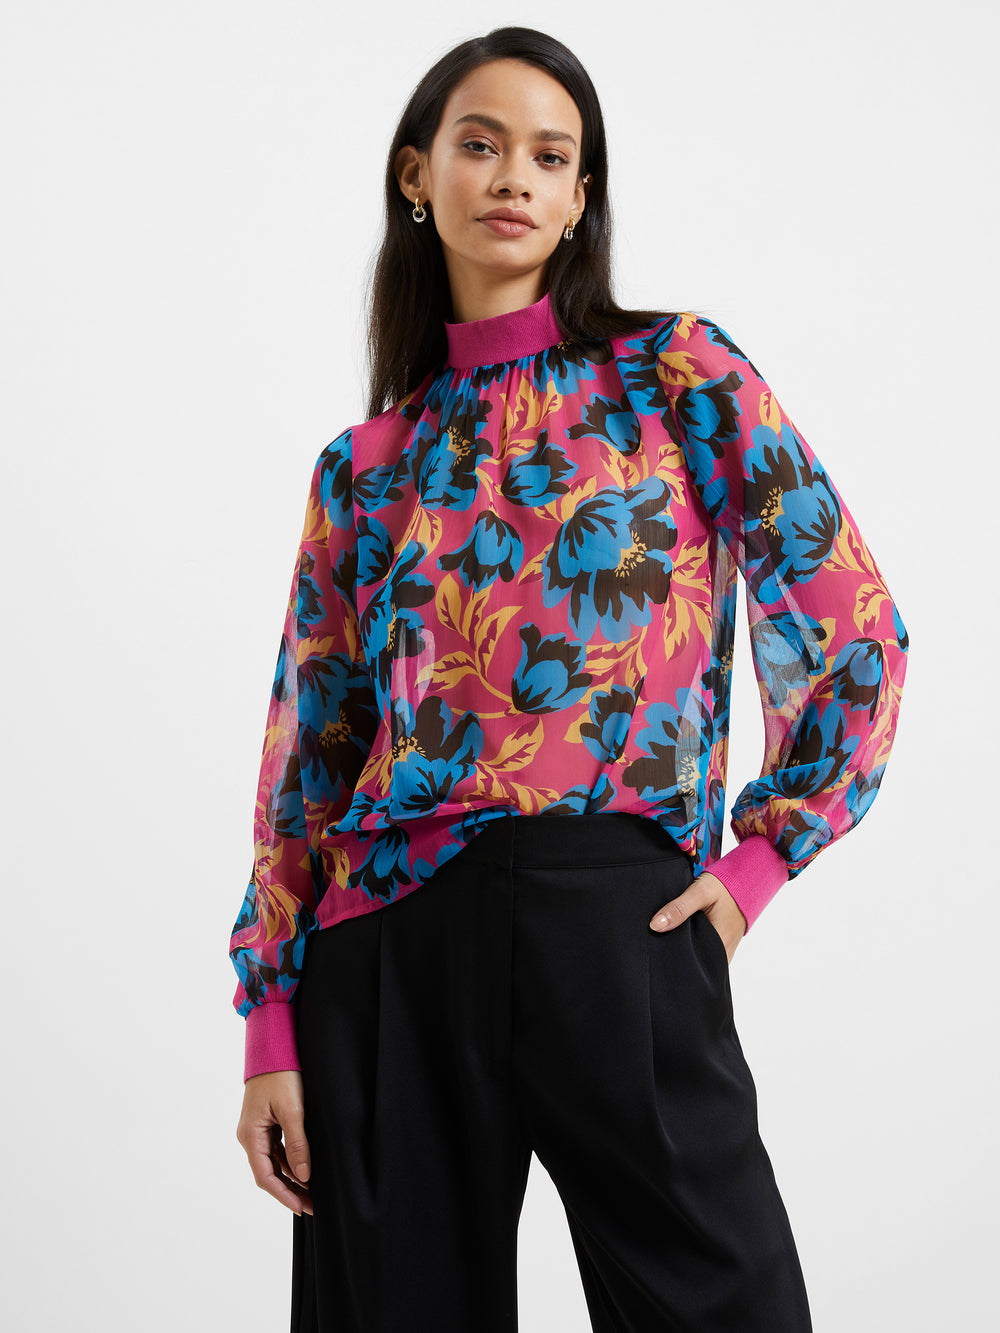 Darla Recycled Eloise High Neck Top Fuschia | French Connection UK